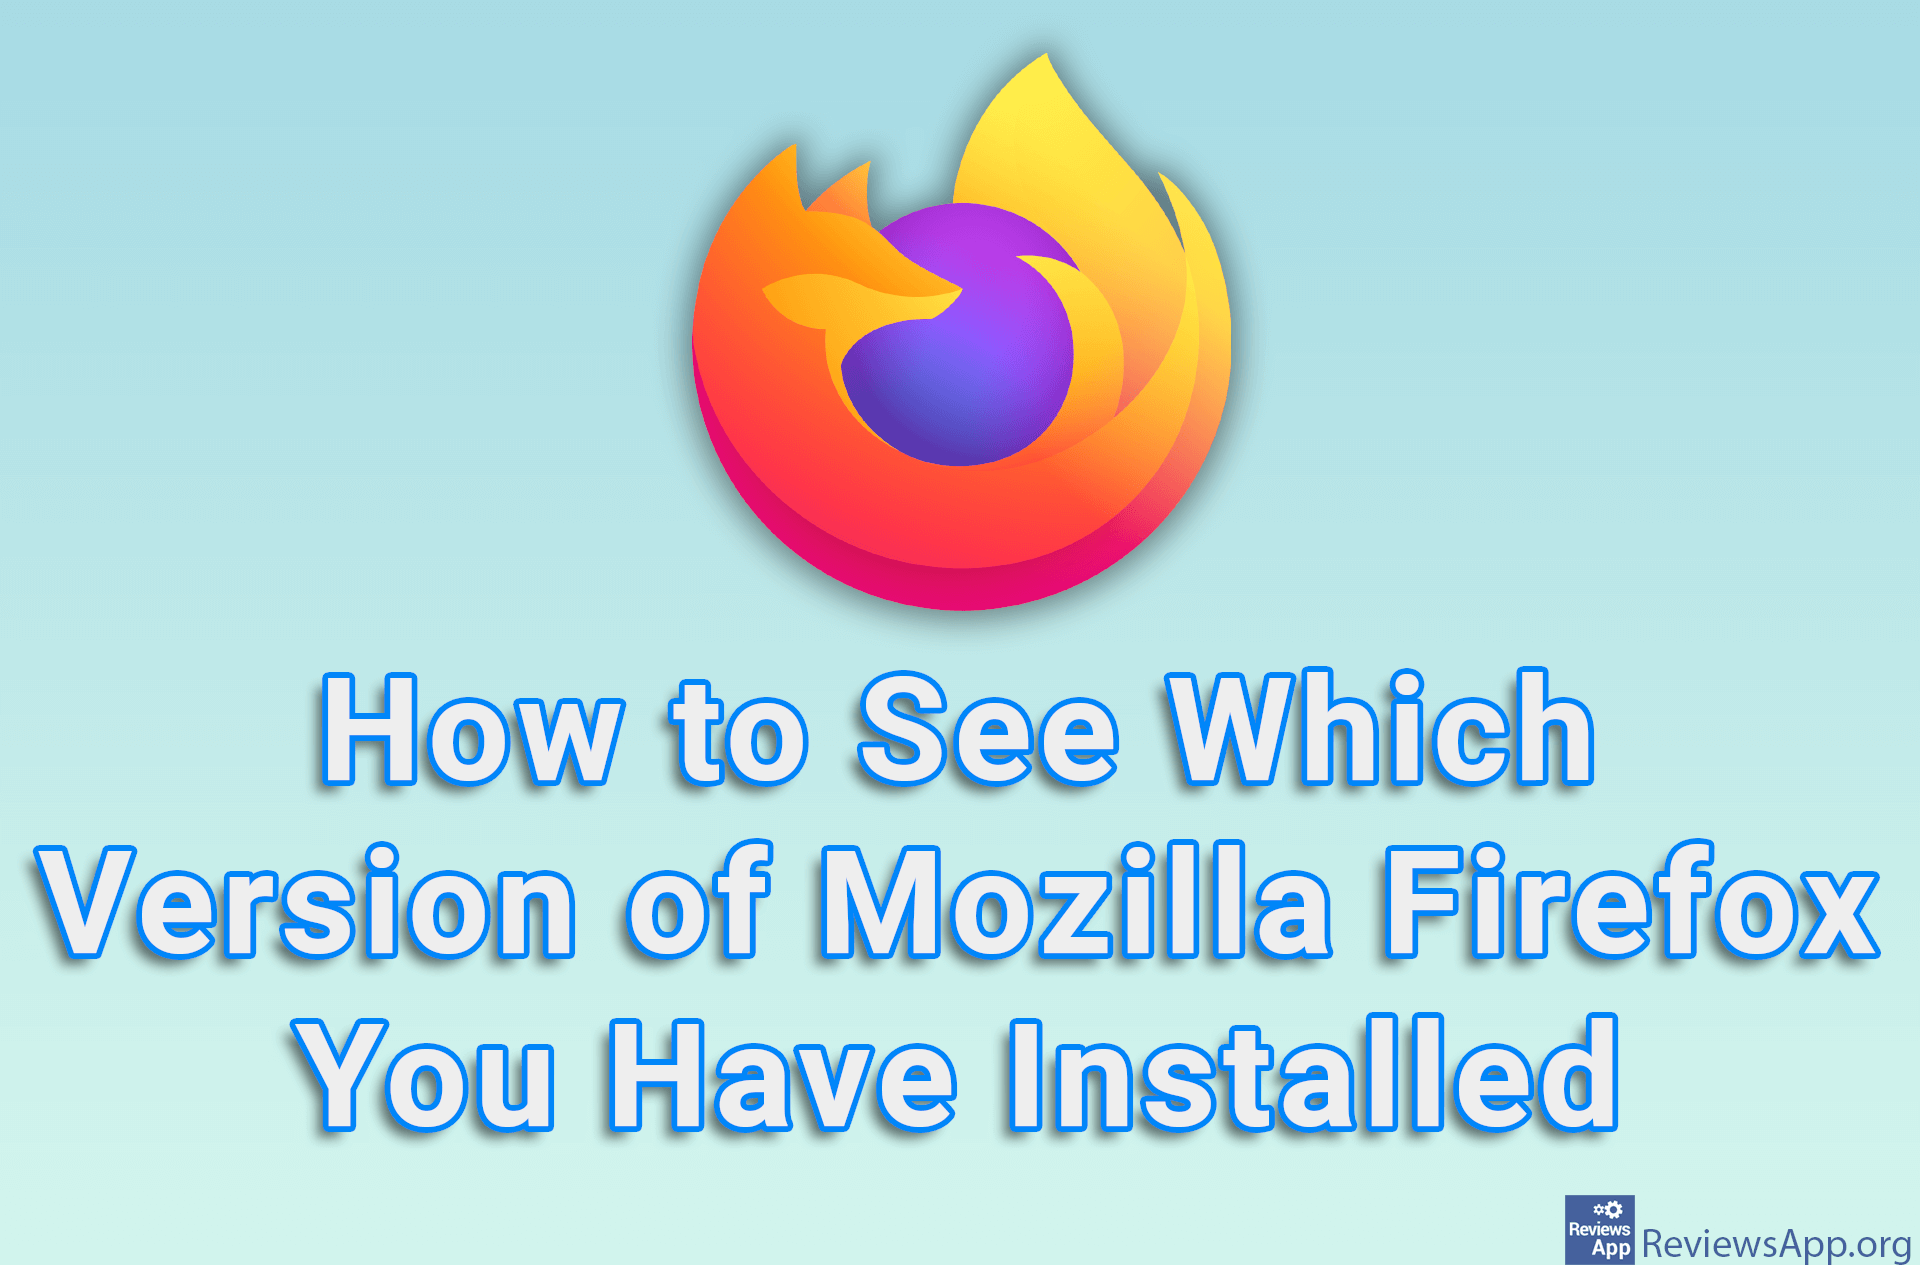 How to See Which Version of Mozilla Firefox You Have Installed